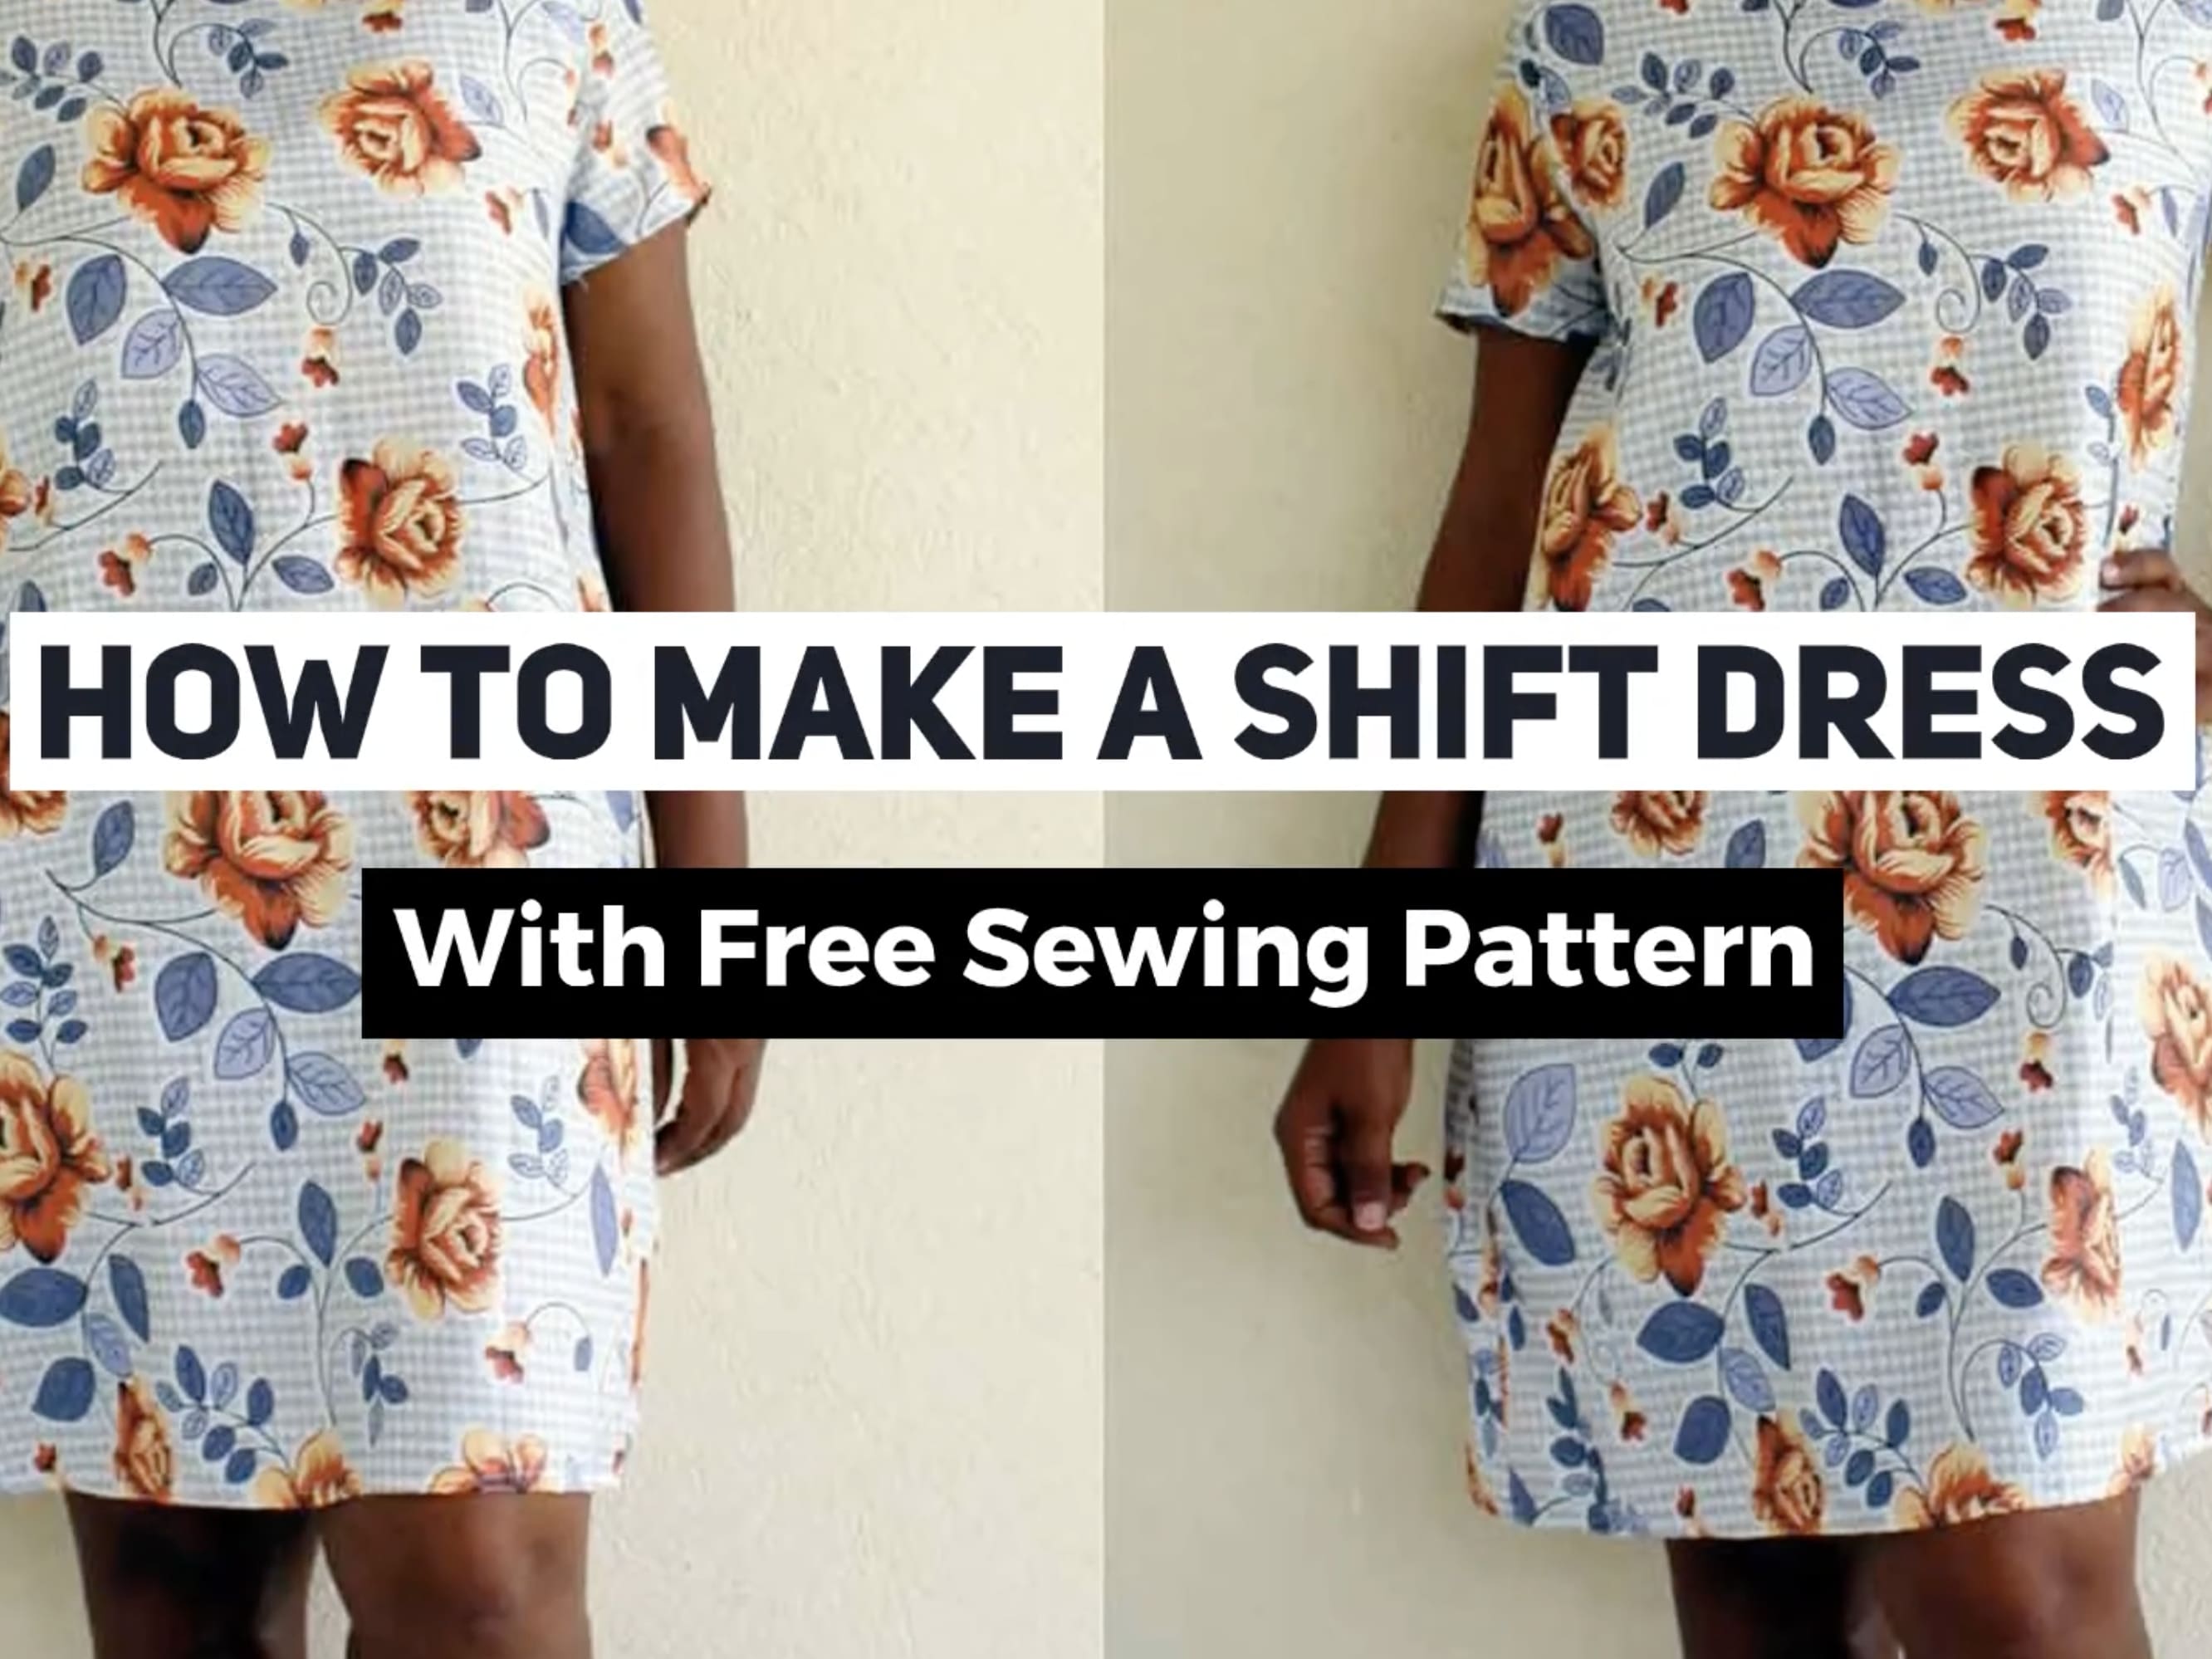 How To Make A Shift Dress With Free Sewing Pattern